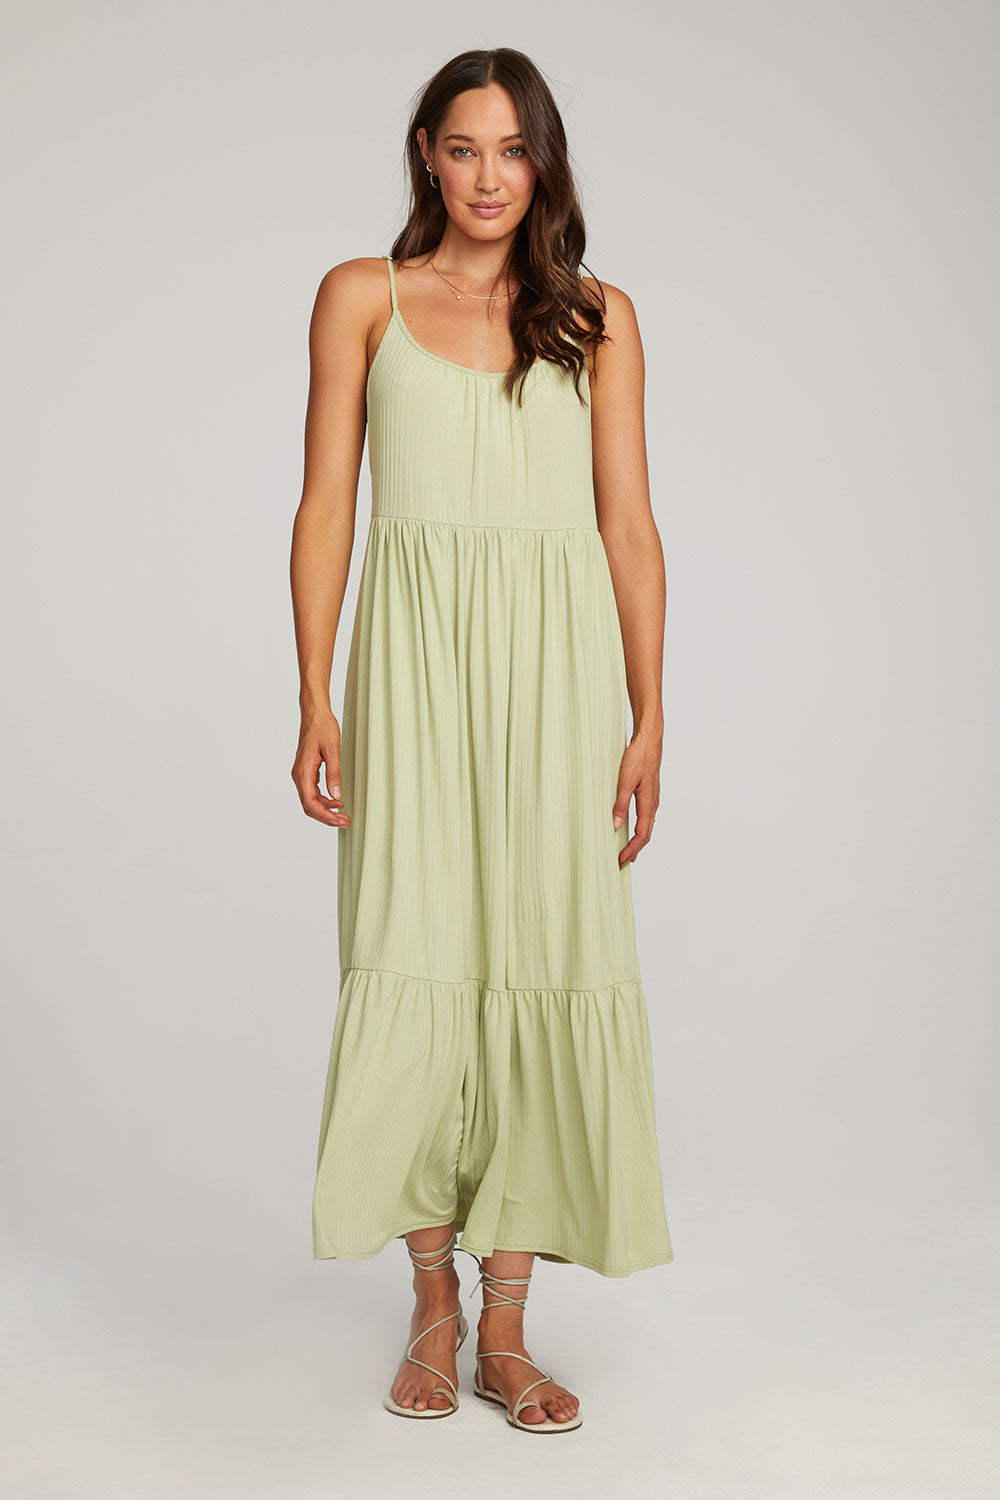 The Alanya Maxi Dress by Saltwater Luxe – THE SKINNY